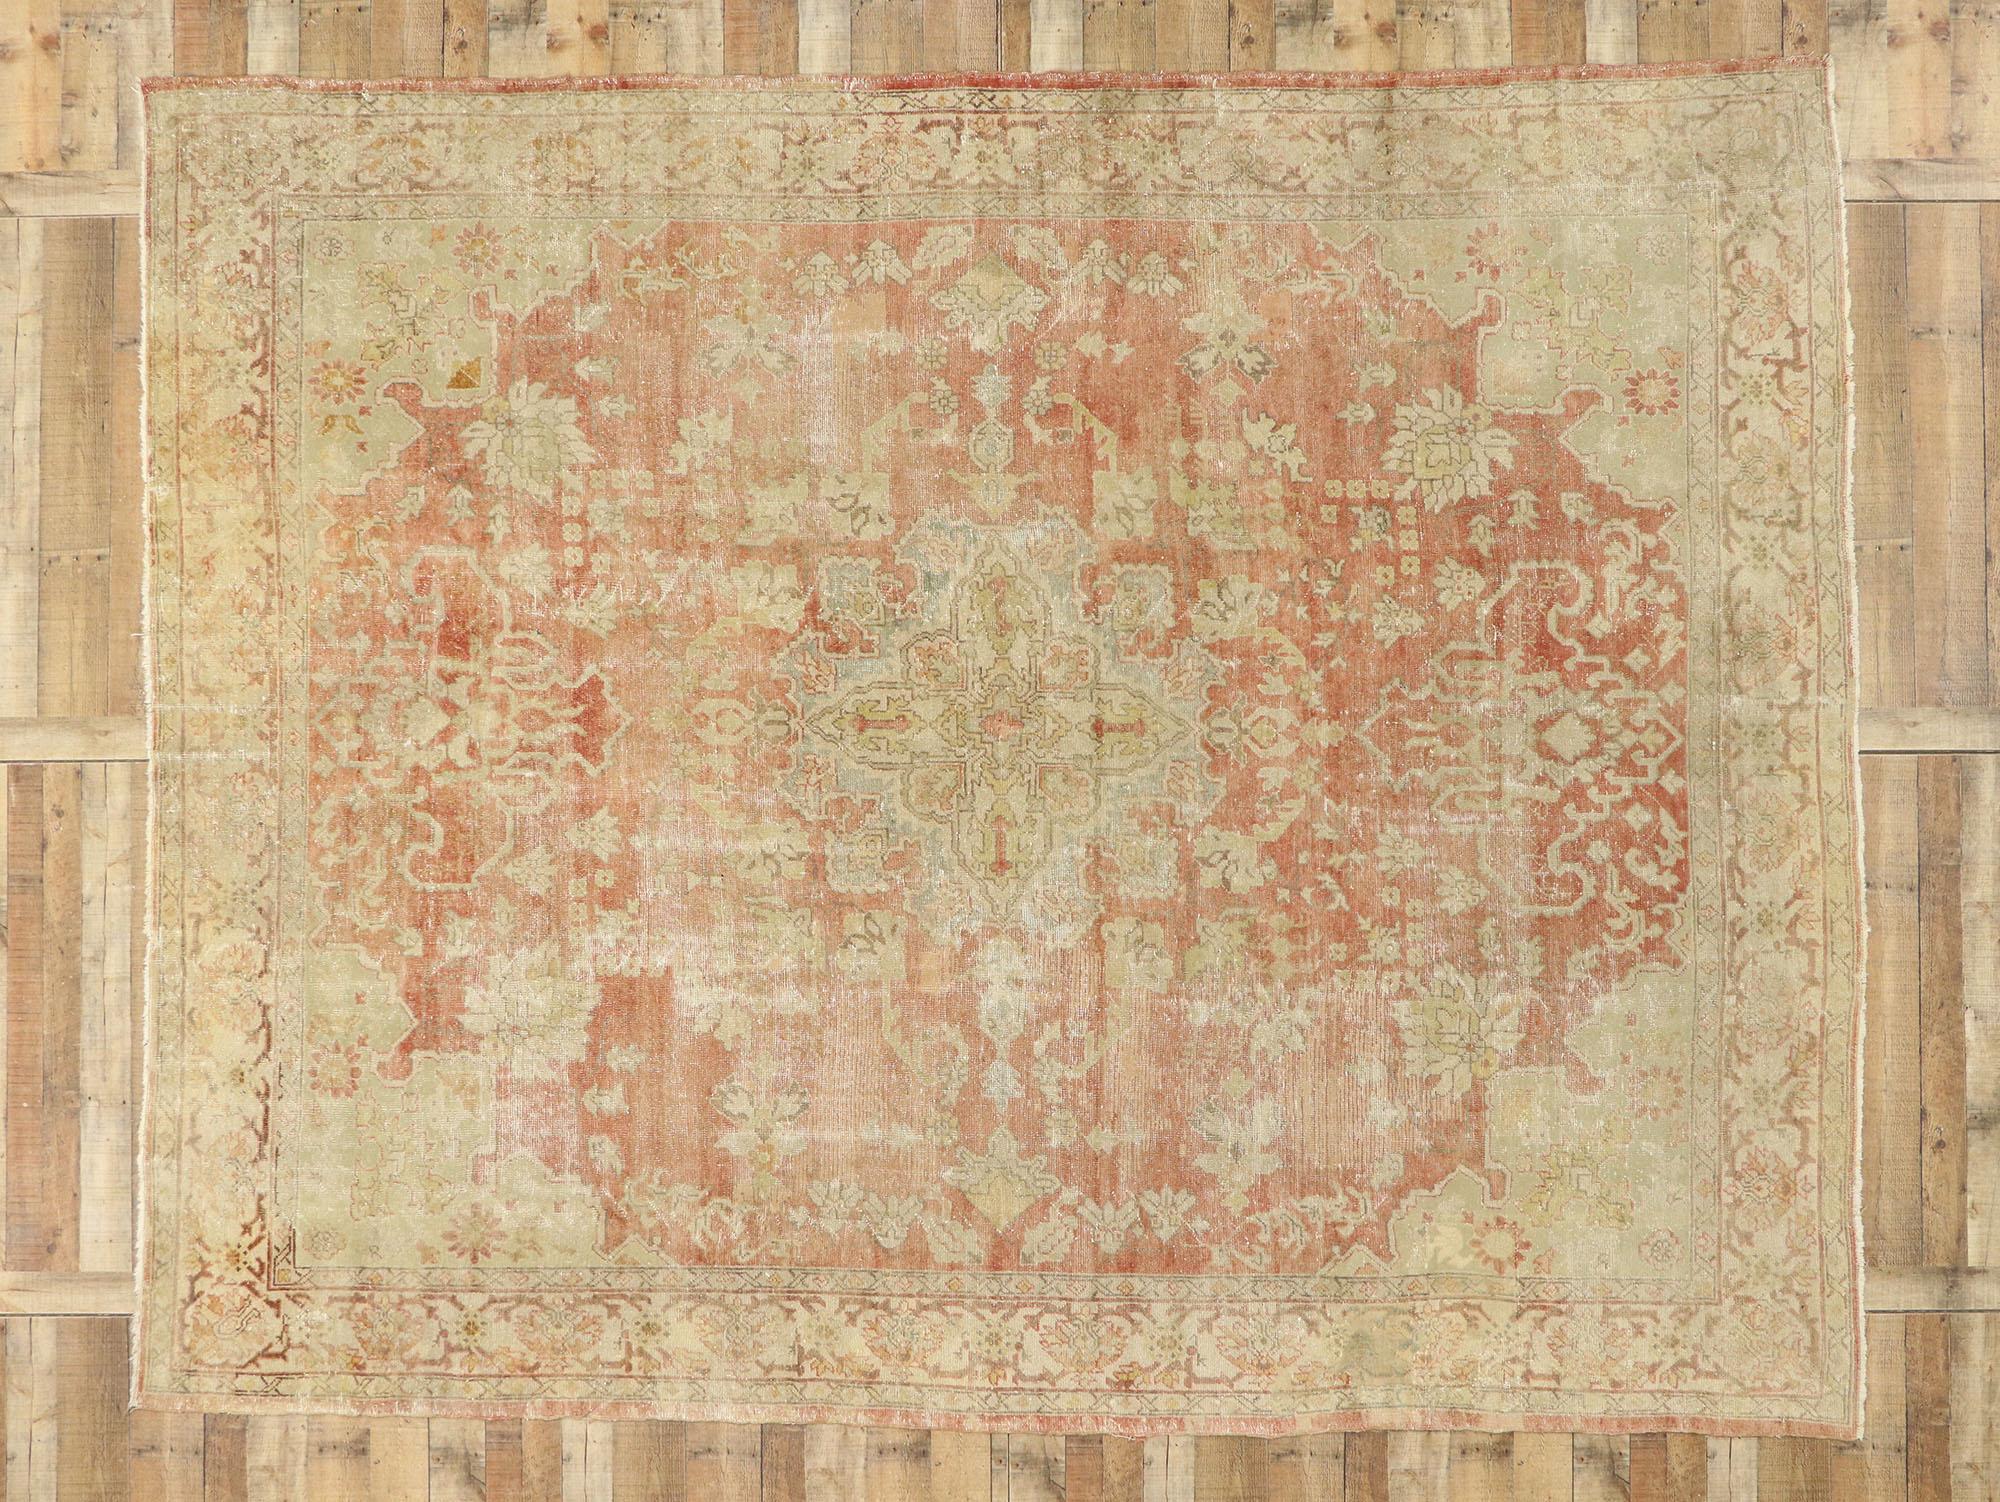 Wool Distressed Antique Turkish Oushak Rug, 09'09 x 12'04 For Sale